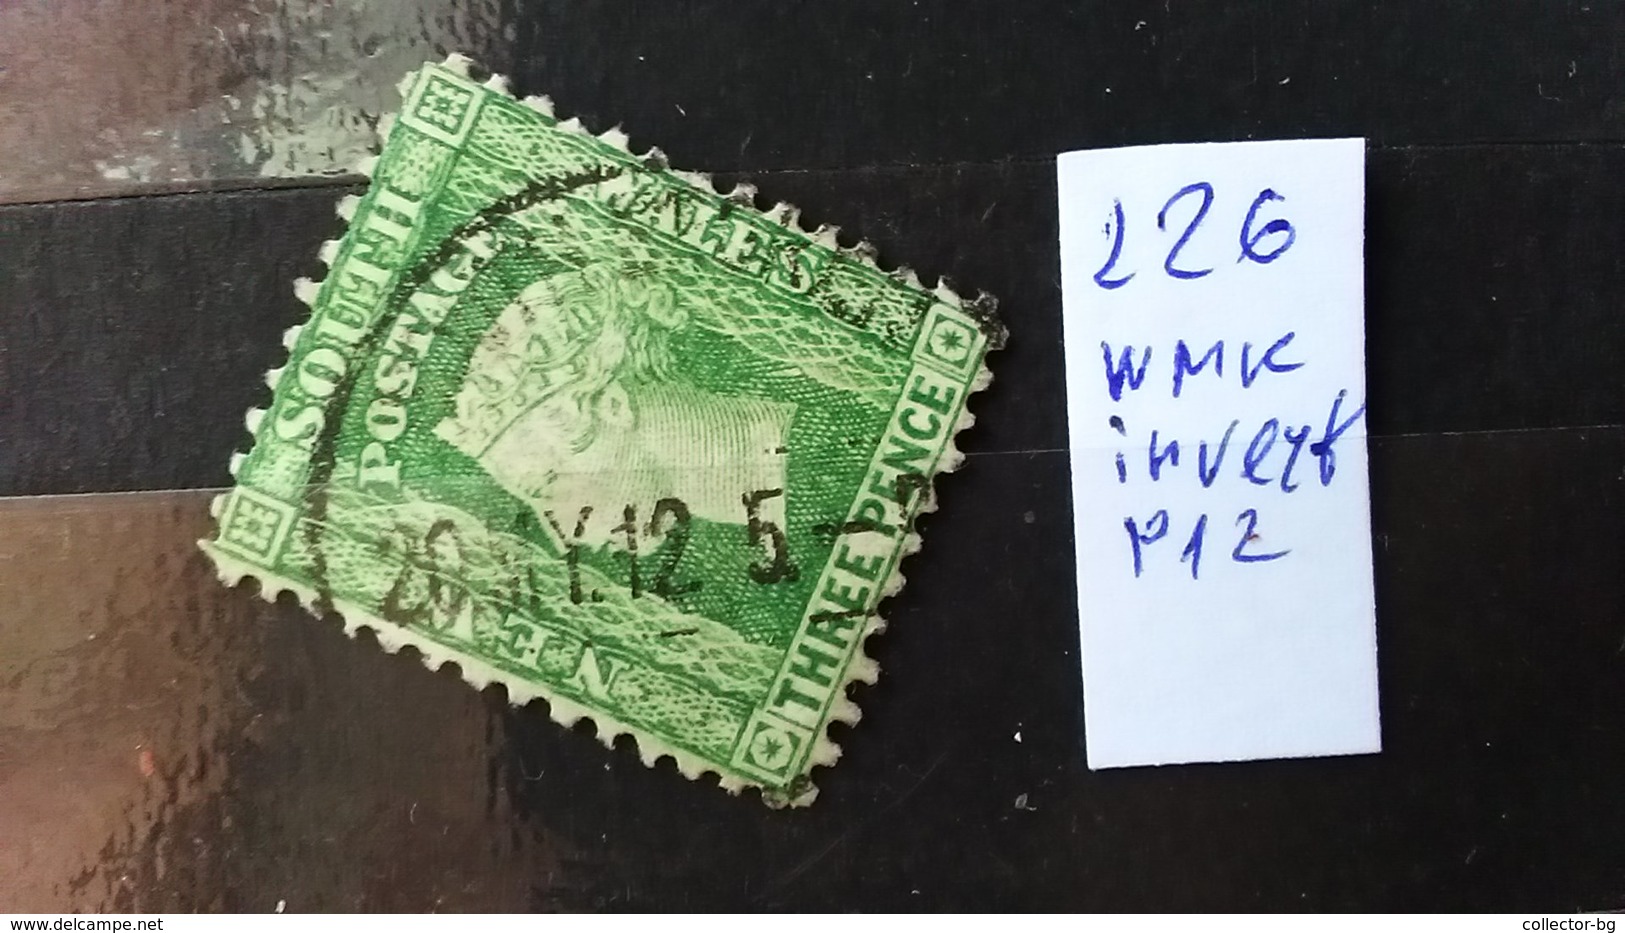 RRR RARE 3 THREE PENCE GREEN NEW SOUTH WALES AUSTRALIA QUEEN VICTORIA ERROR WMK INVERT 226 P12 NO SEE OTHER STAMP TIMBRE - Neufs